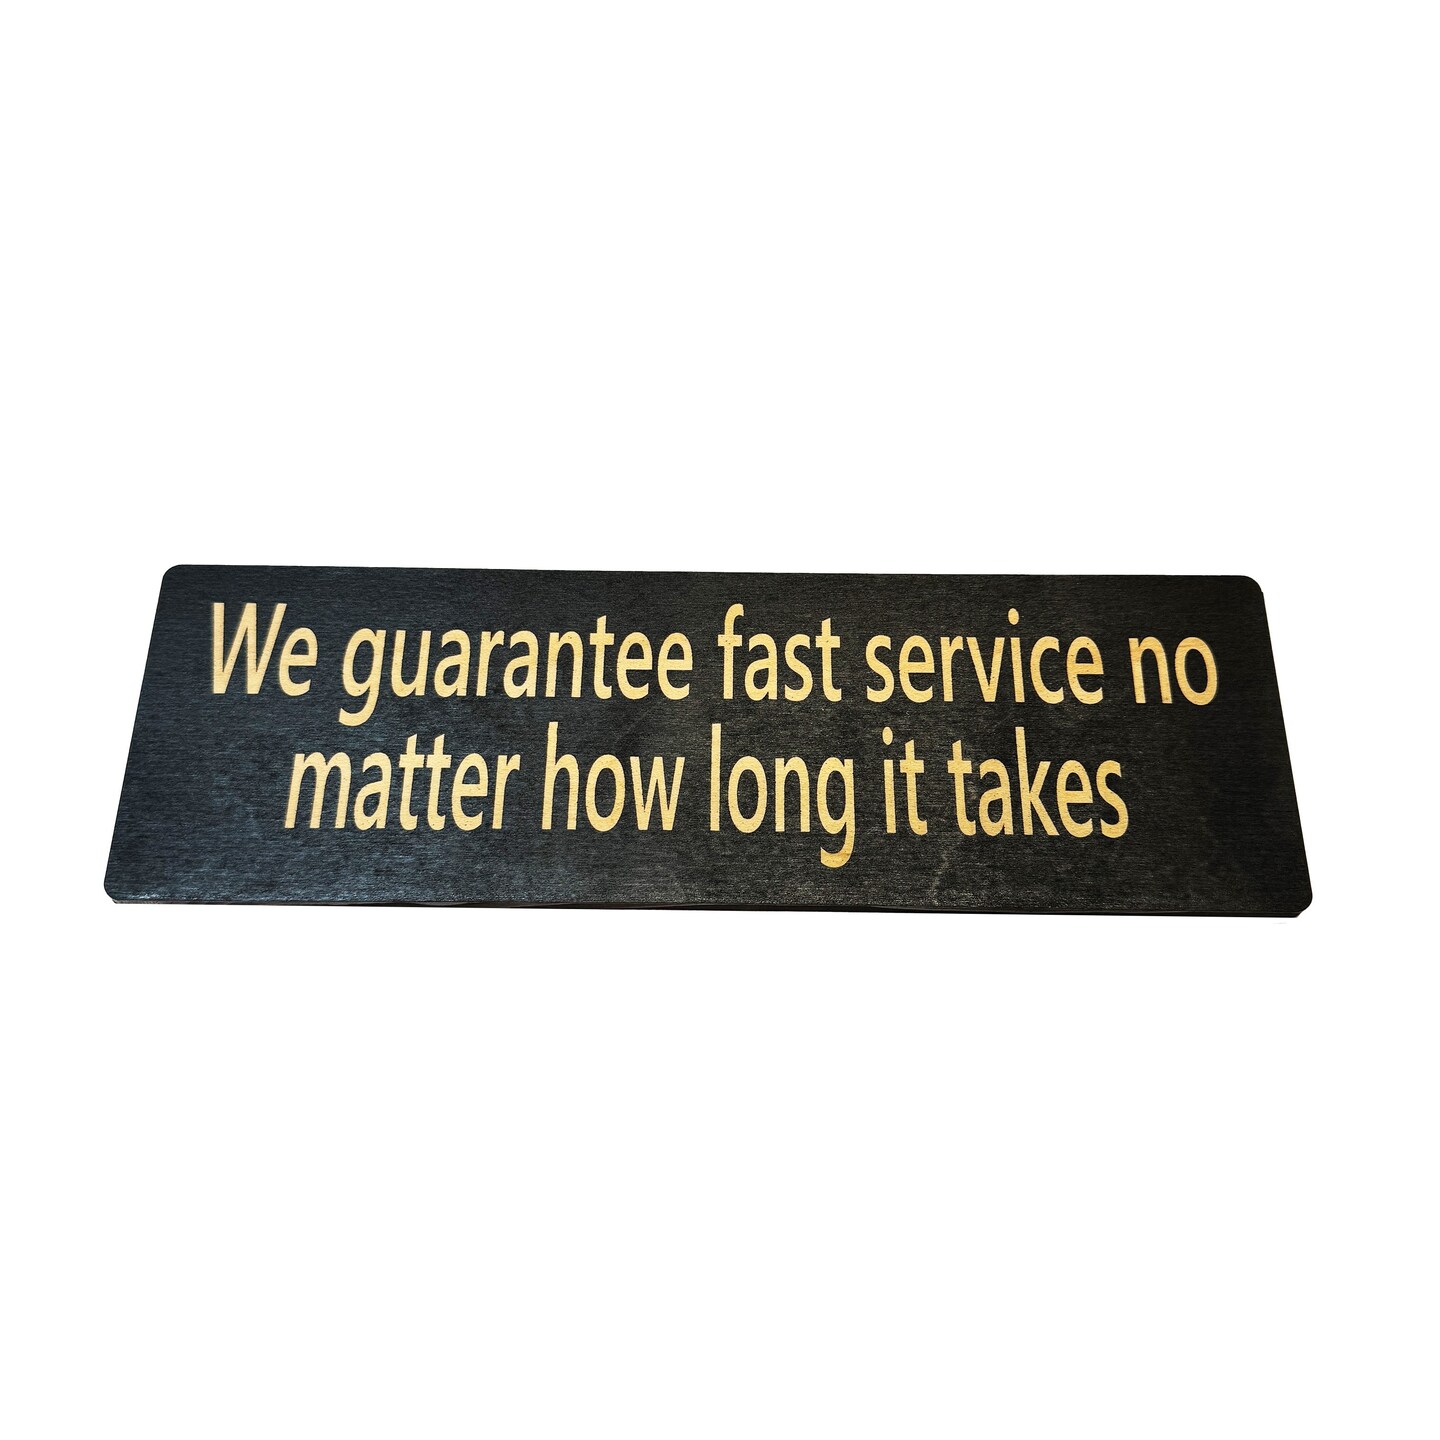 We guarantee fast service no matter how long it takes - BLACK Sign 4x12